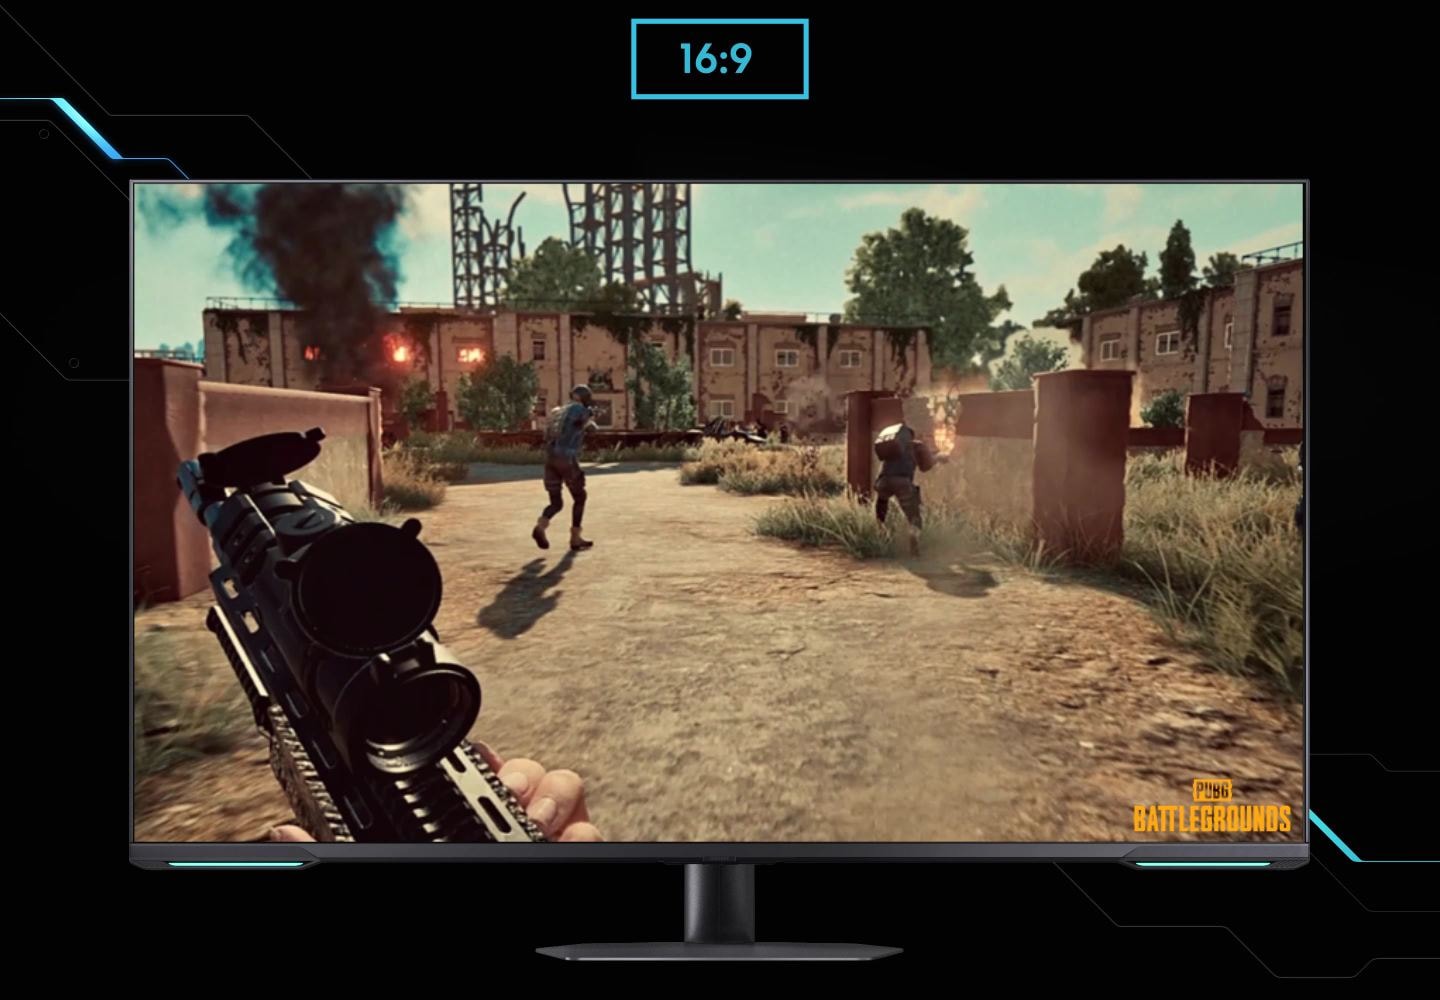 A monitor shows the viewpoint of a player within a shooting game. As the screen is extended from 16:9 to 21:9 ratio, an unseen enemy reveals in the left corner. \Battleground\ logo is shown on the right lower corner of the screen.